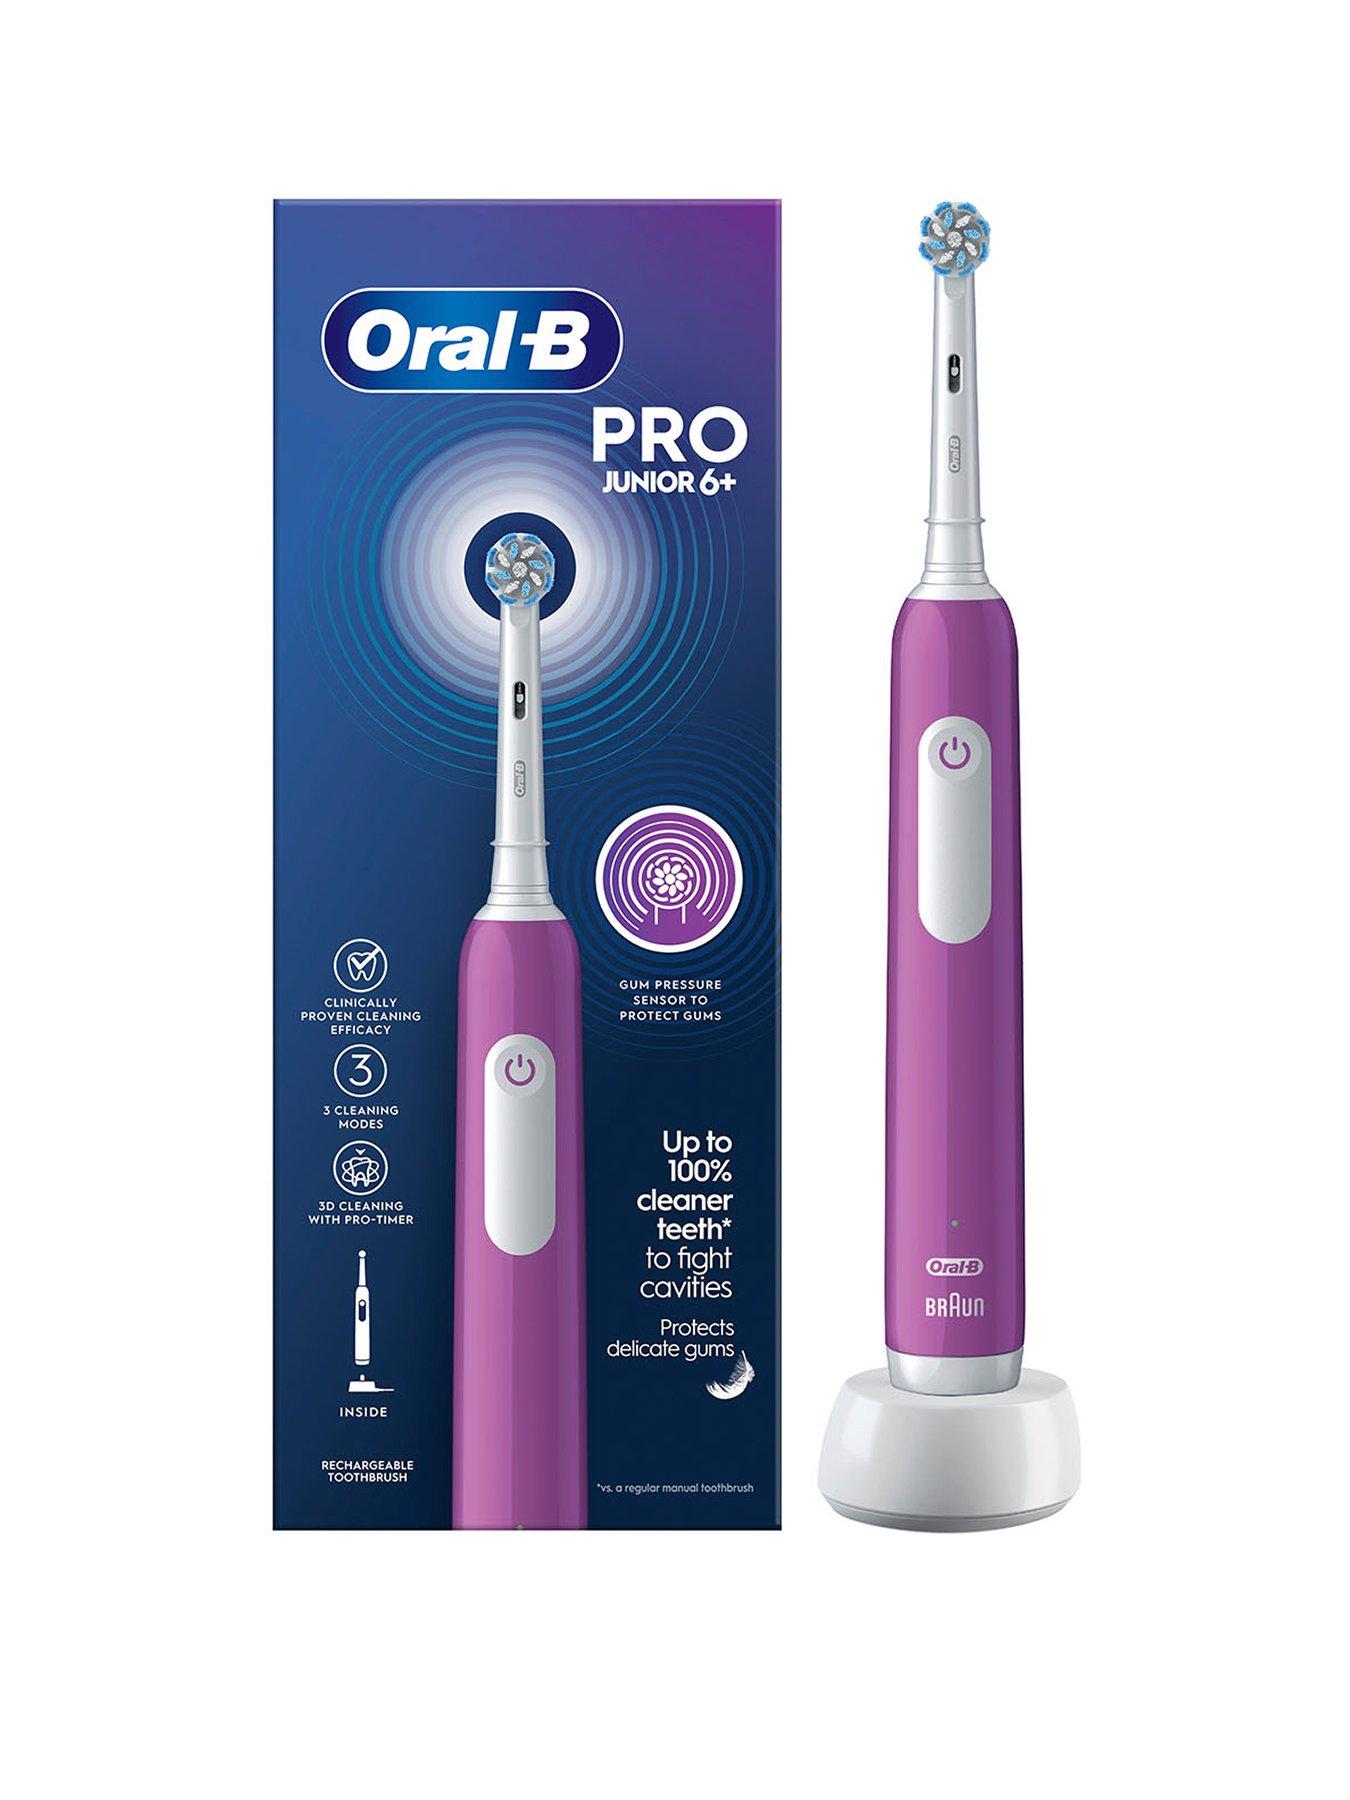 Braun Oral-B Pulsonic Slim Sonic Rechargeable Vibrate Power Electric  Toothbrush